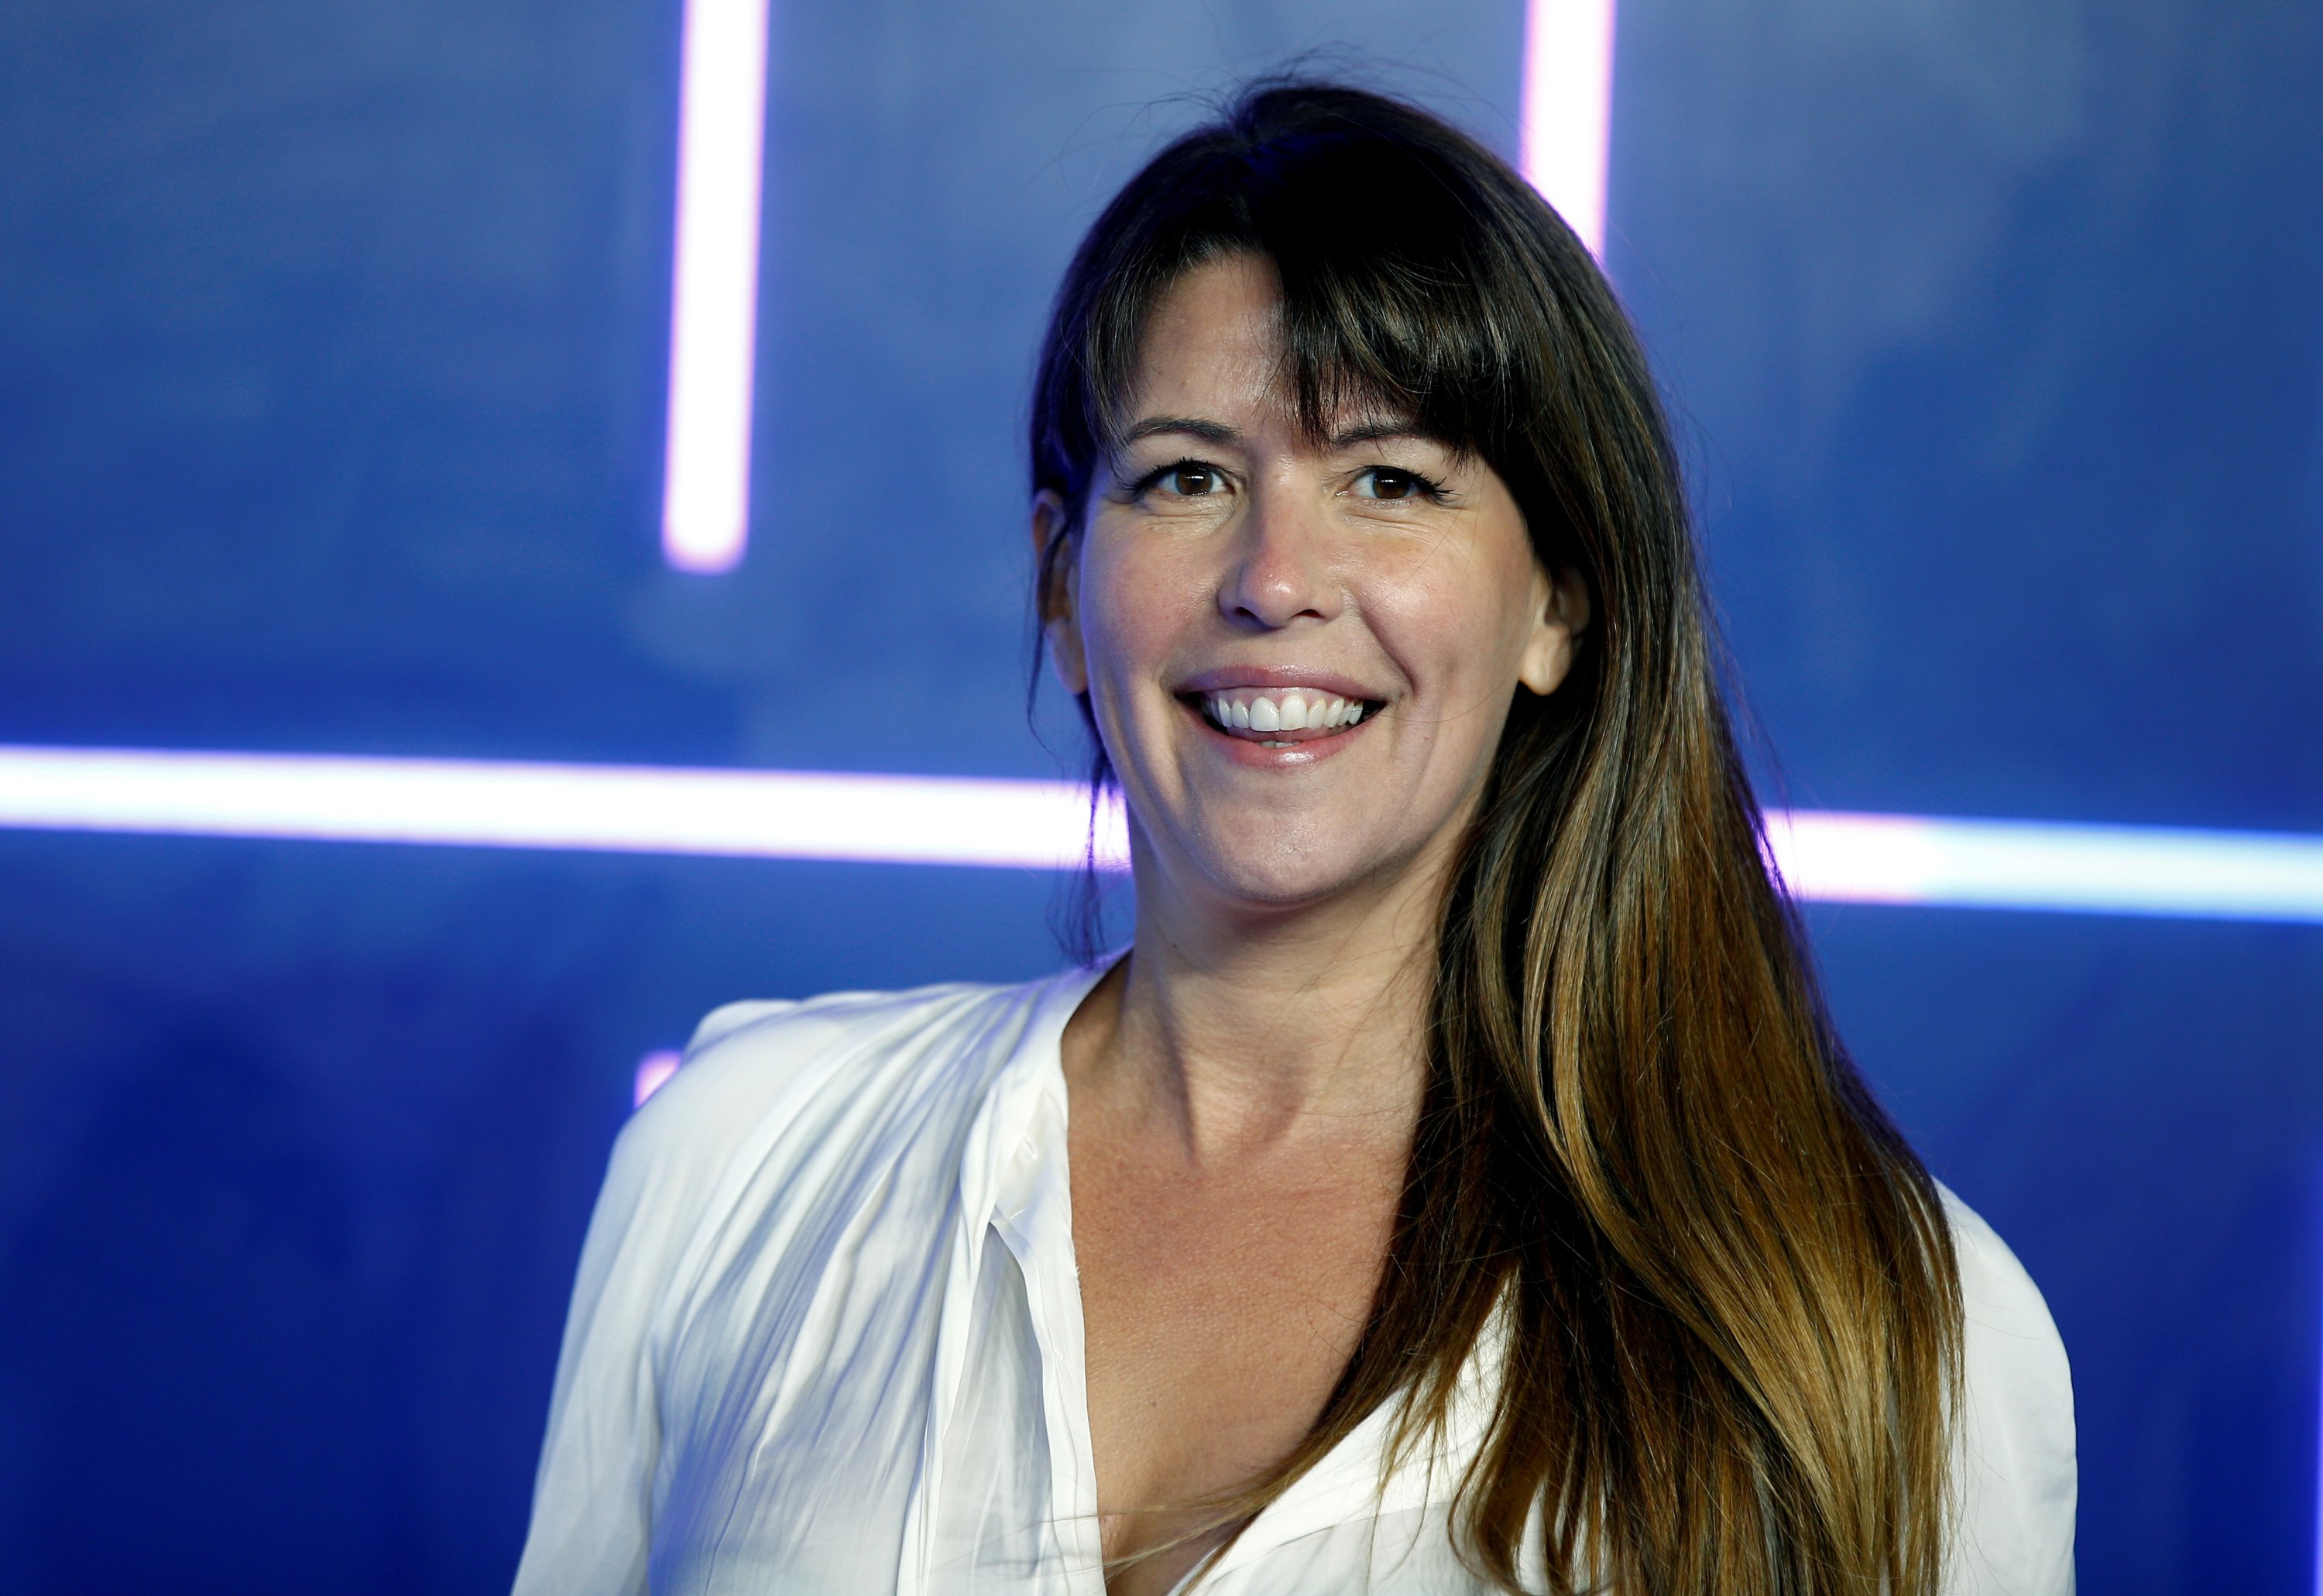 Patty Jenkins attends the European Premiere of 'Ready Player One' in London, Britain, March 19, 2018. (REUTERS Photo)